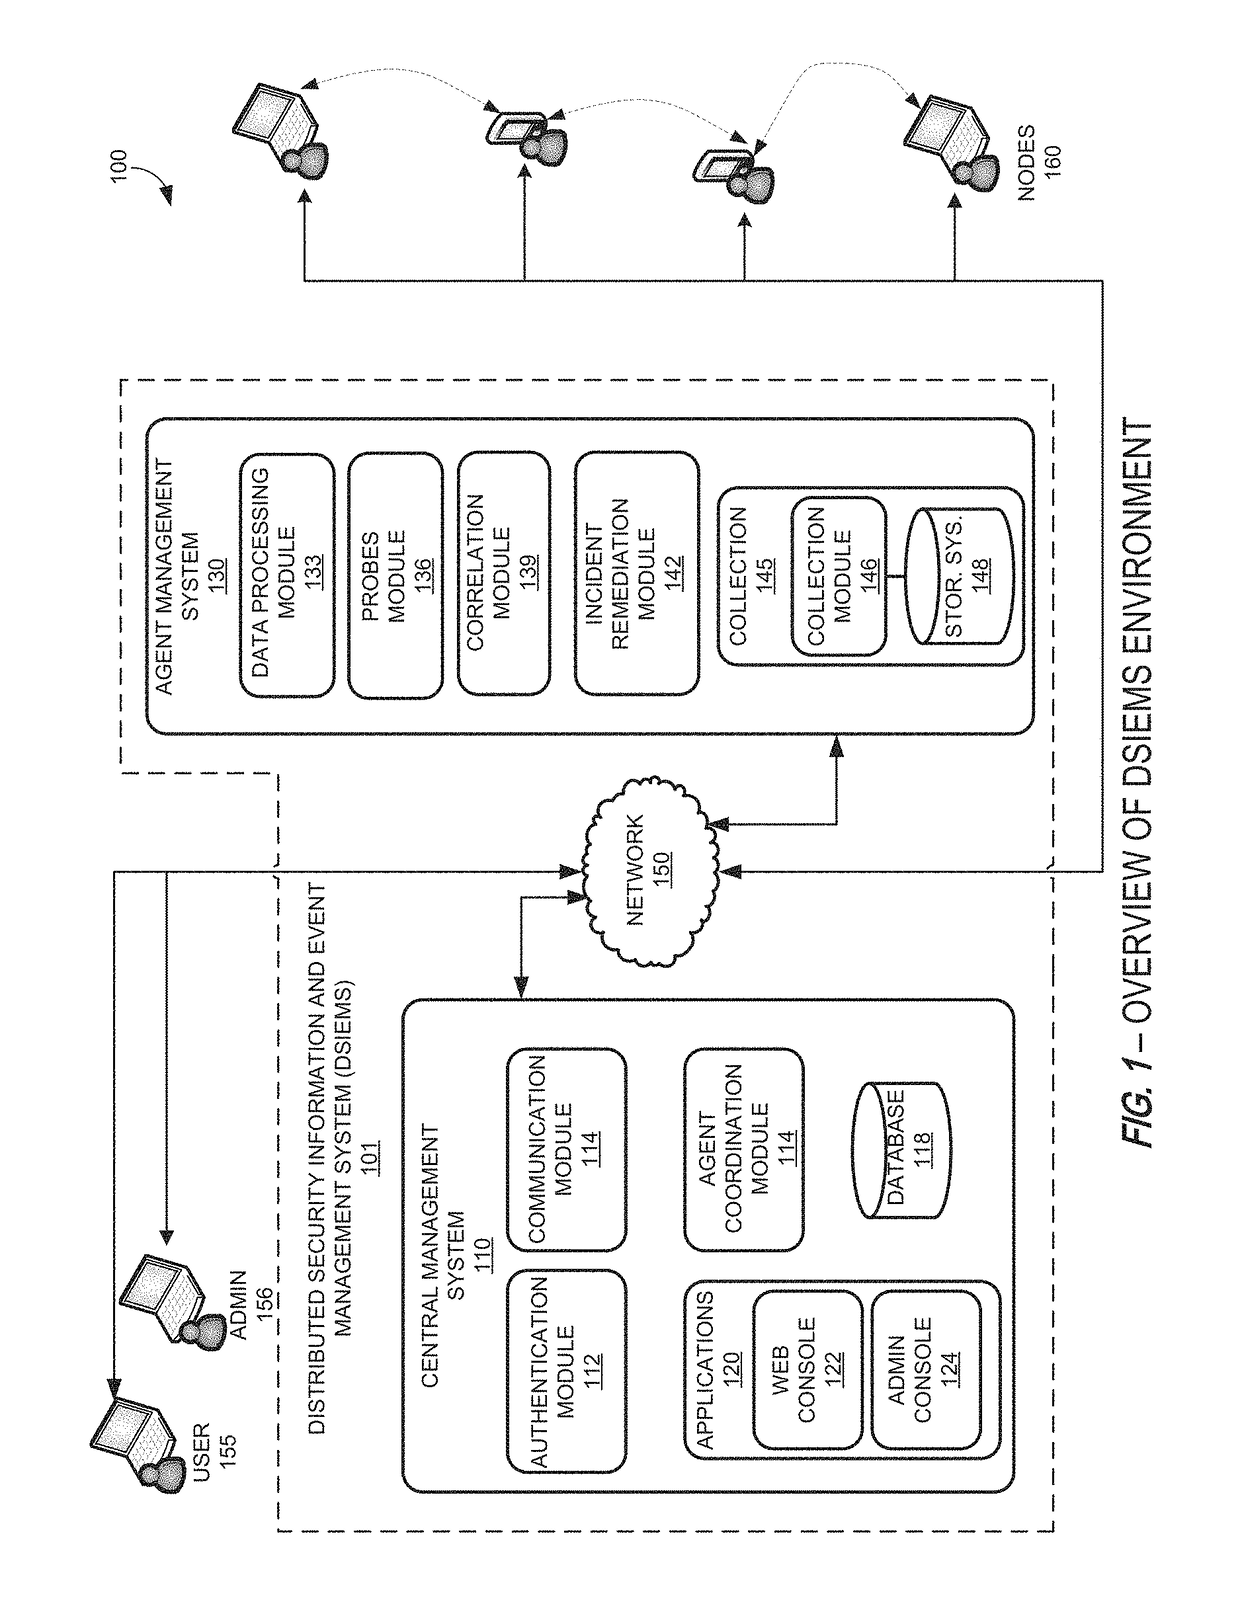 Systems and methods for providing a security information and event management system in a distributed architecture